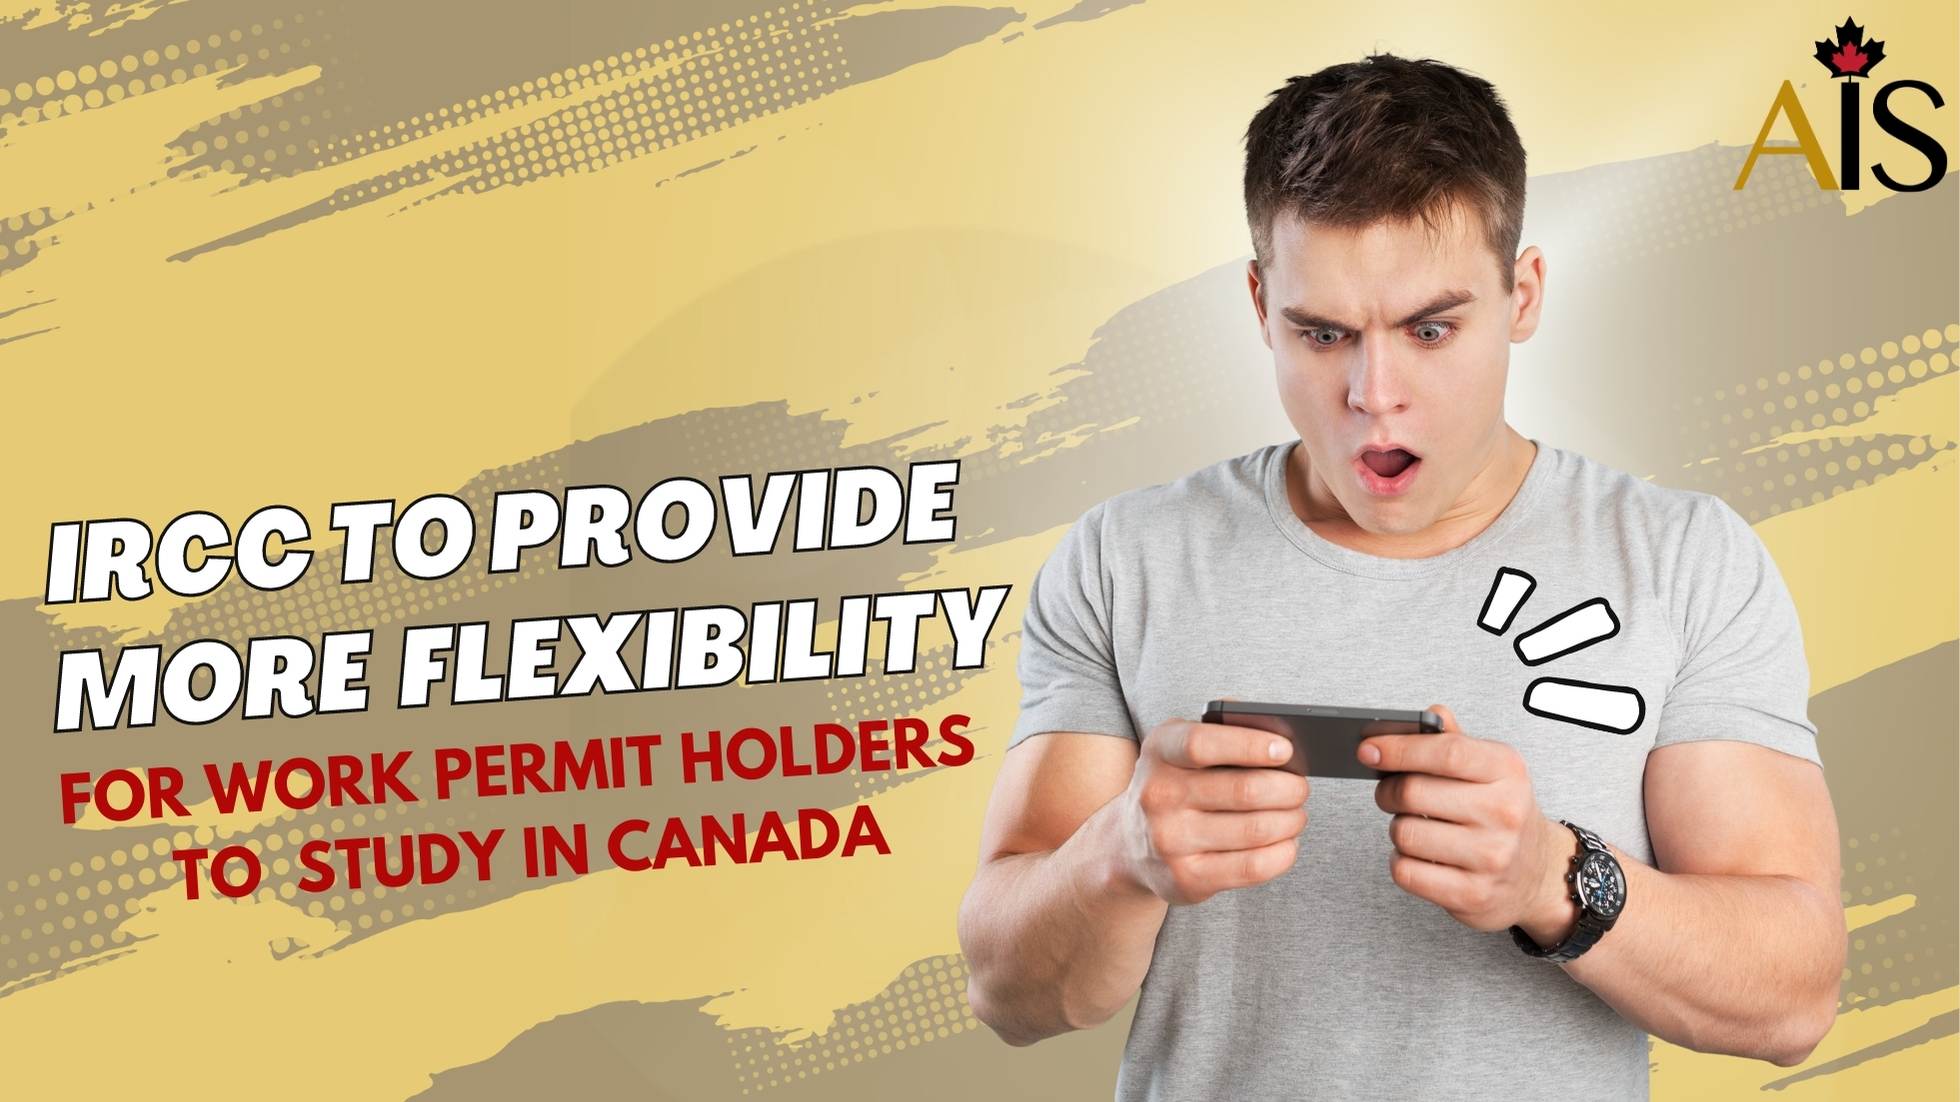 IRCC aims to enhance flexibility by allowing work permit holders to pursue studies in Canada